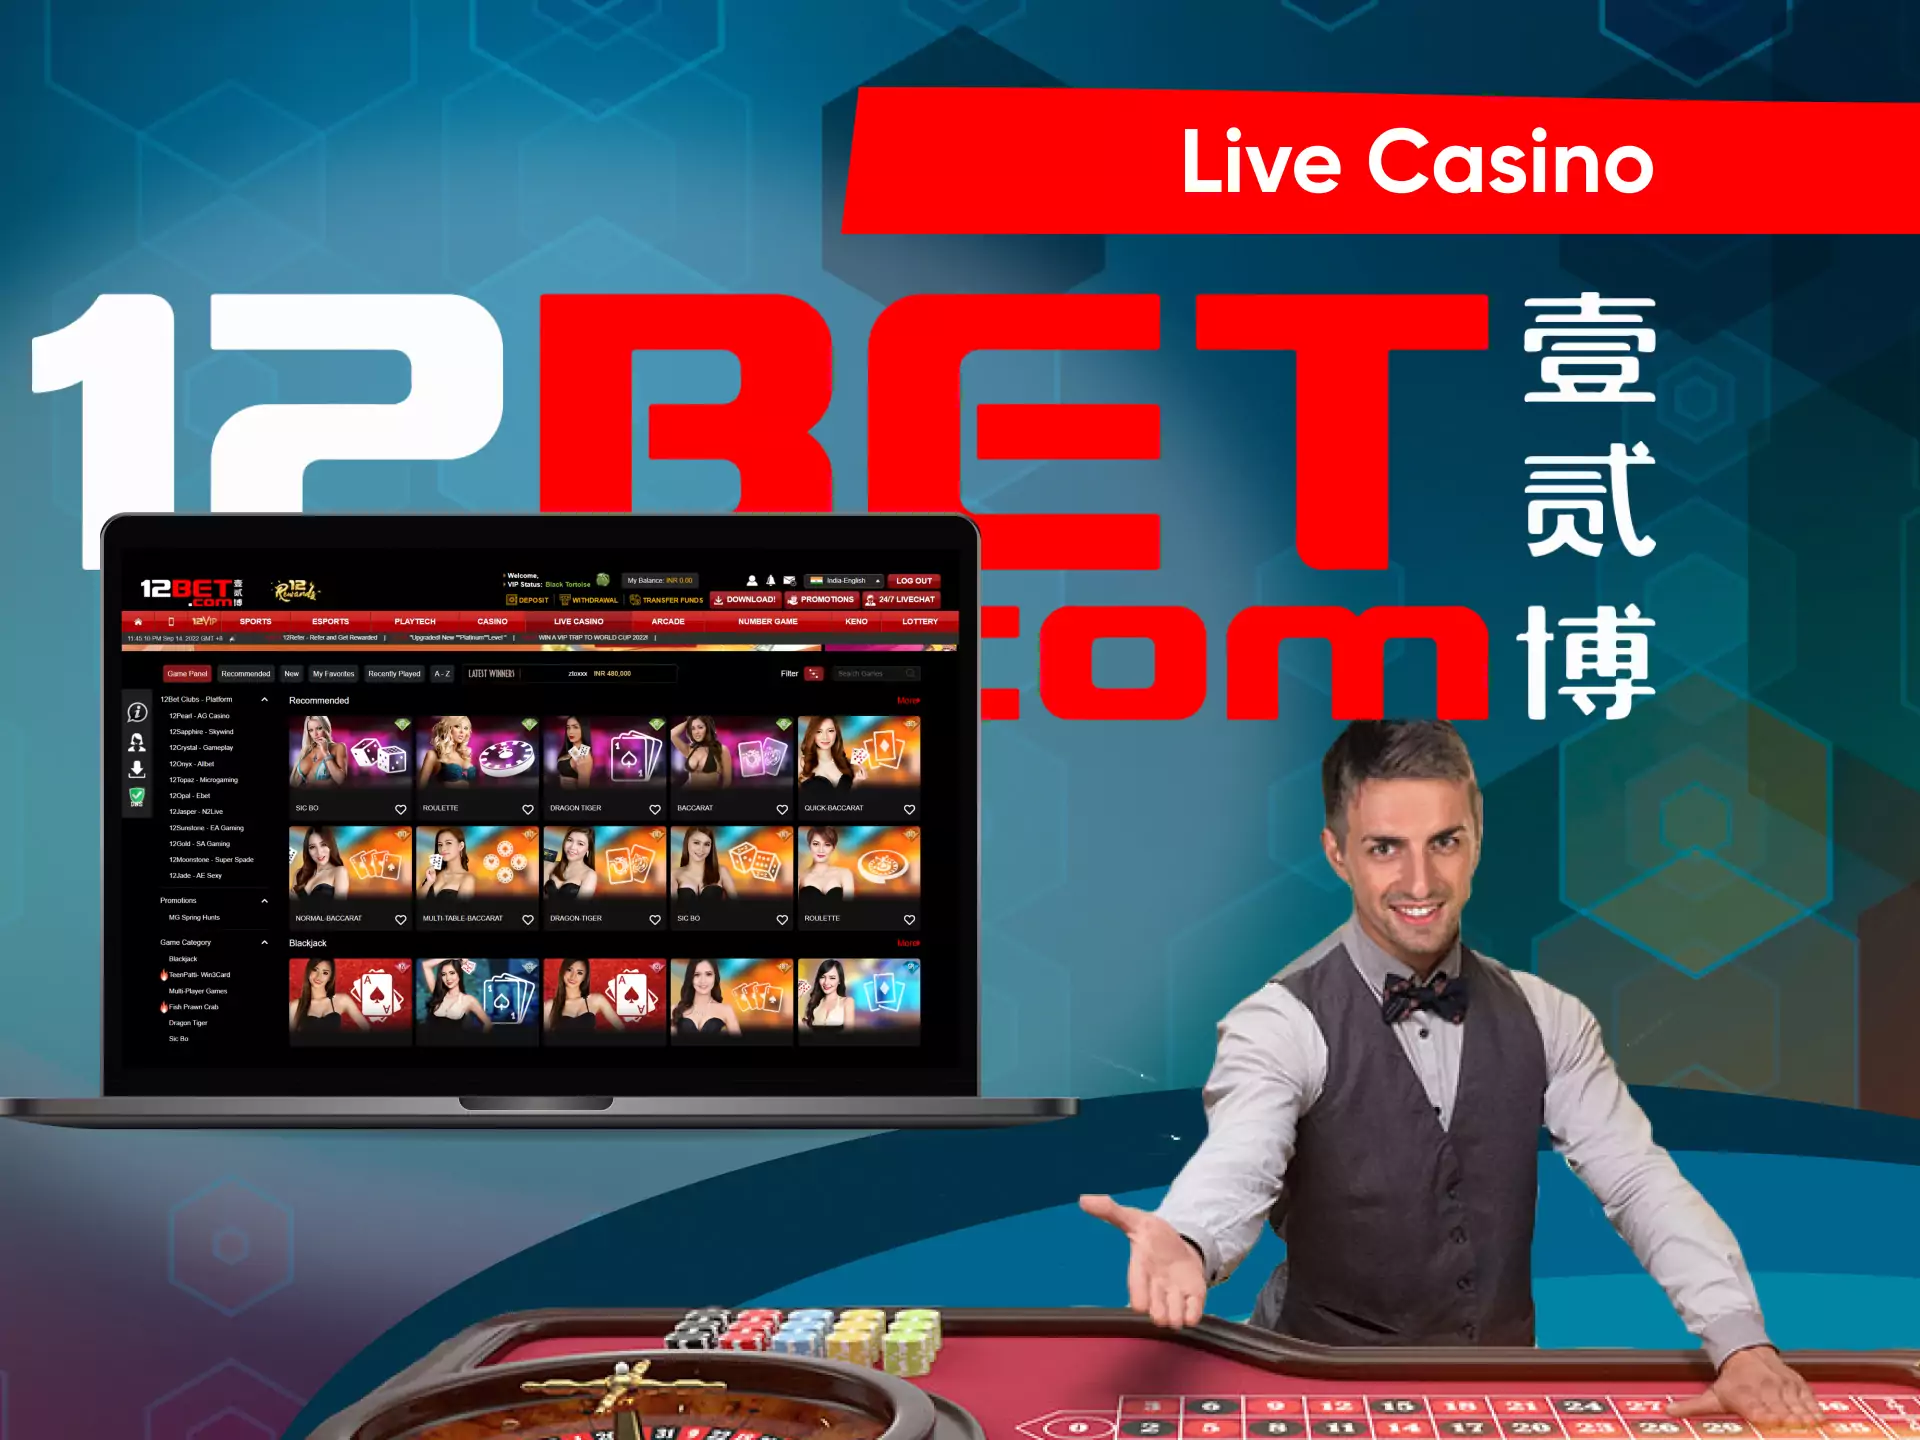 12bet has a live casino with real dealers.